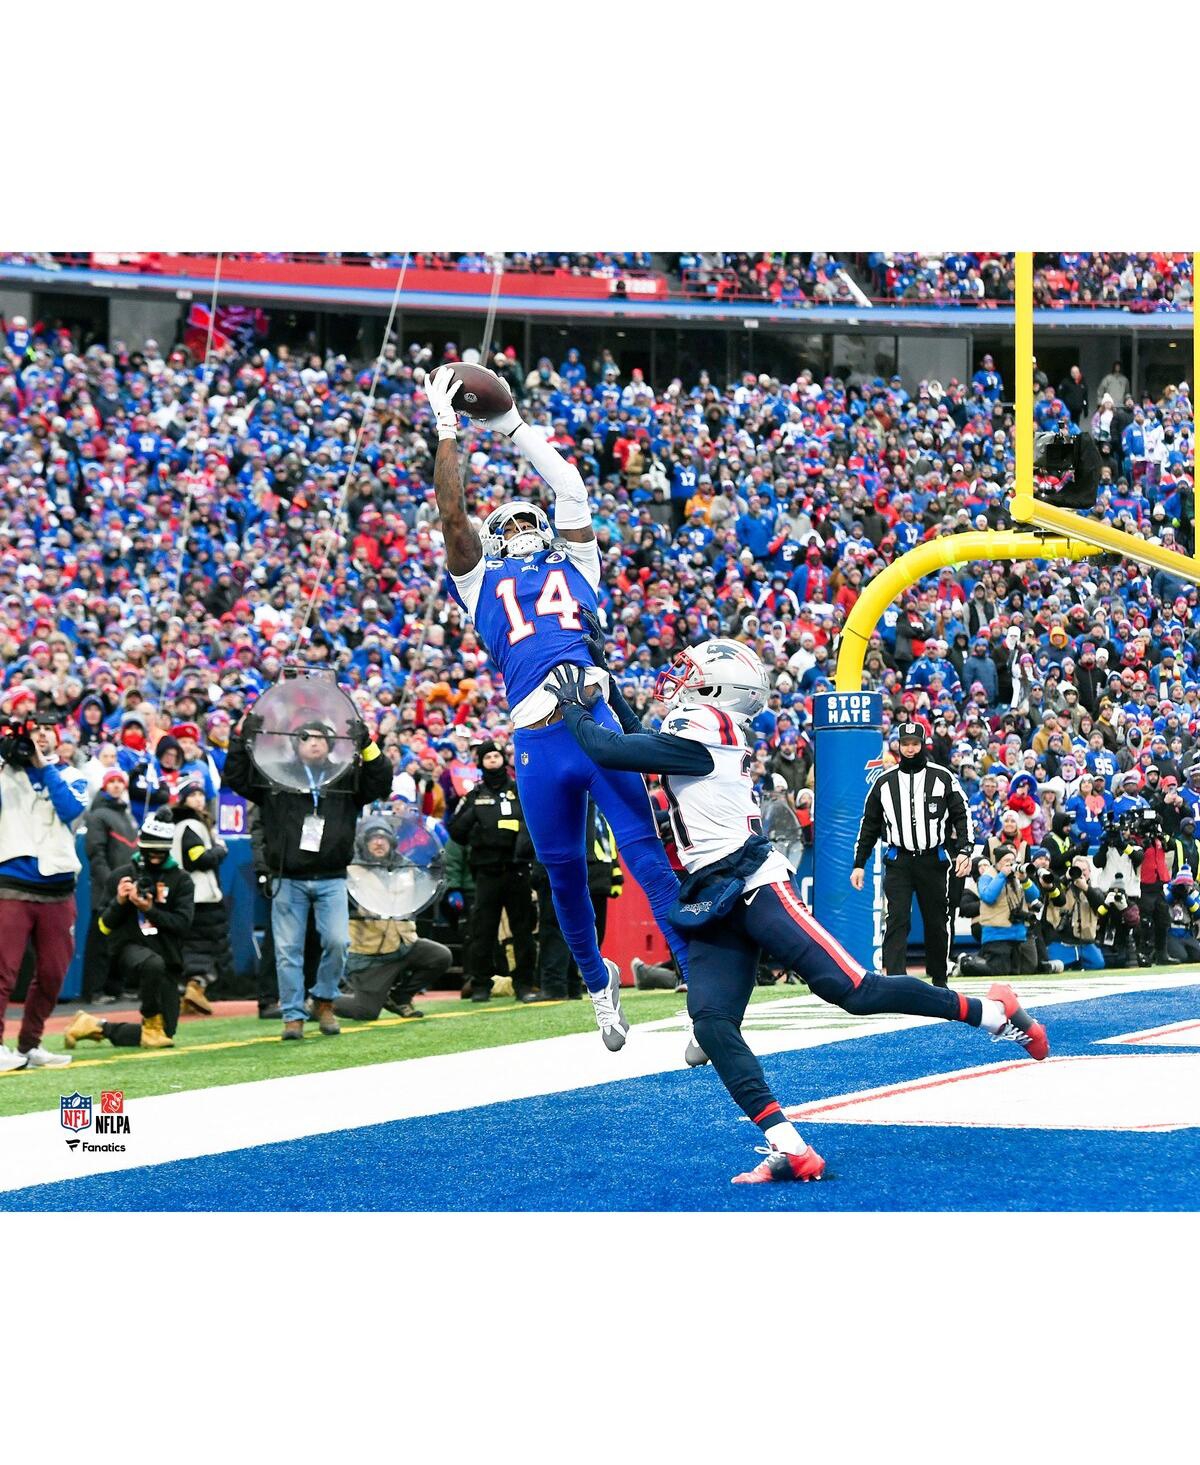 Fanatics Authentic Stefon Diggs Buffalo Bills Unsigned Makes A Touchdown Grab Photograph In Multi